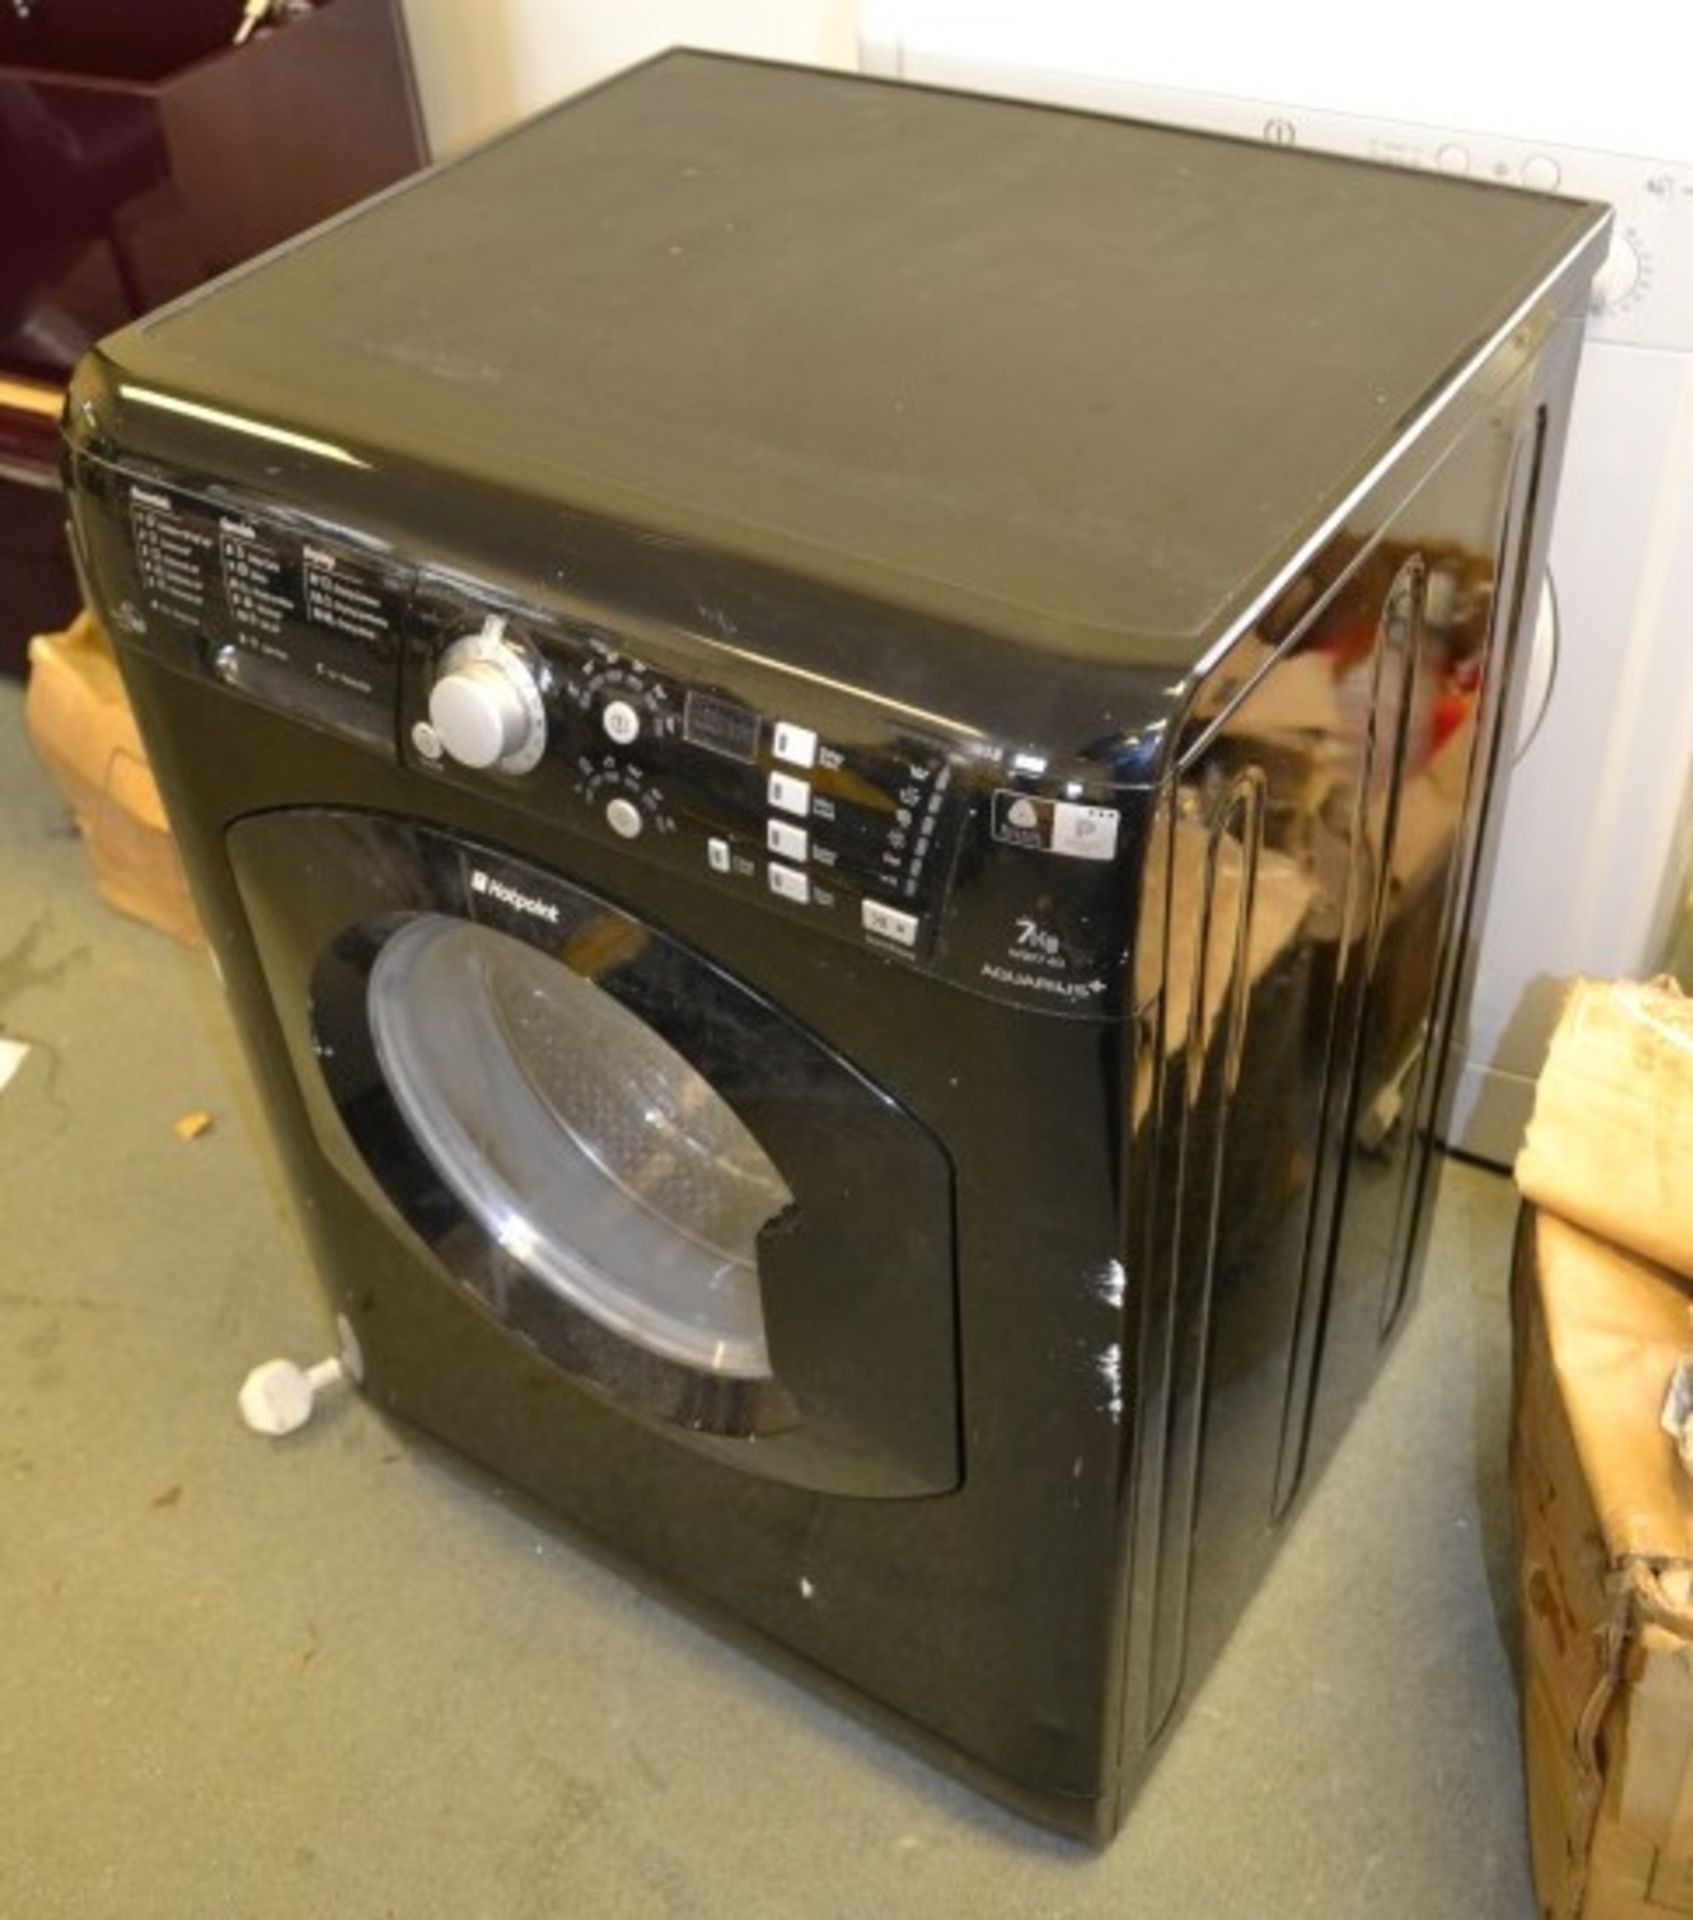 1 x Hotpoint Washing Machine (Model: WDF740 Aquarius) - 7kg Capacity - From A Clean Manor House - Image 2 of 6